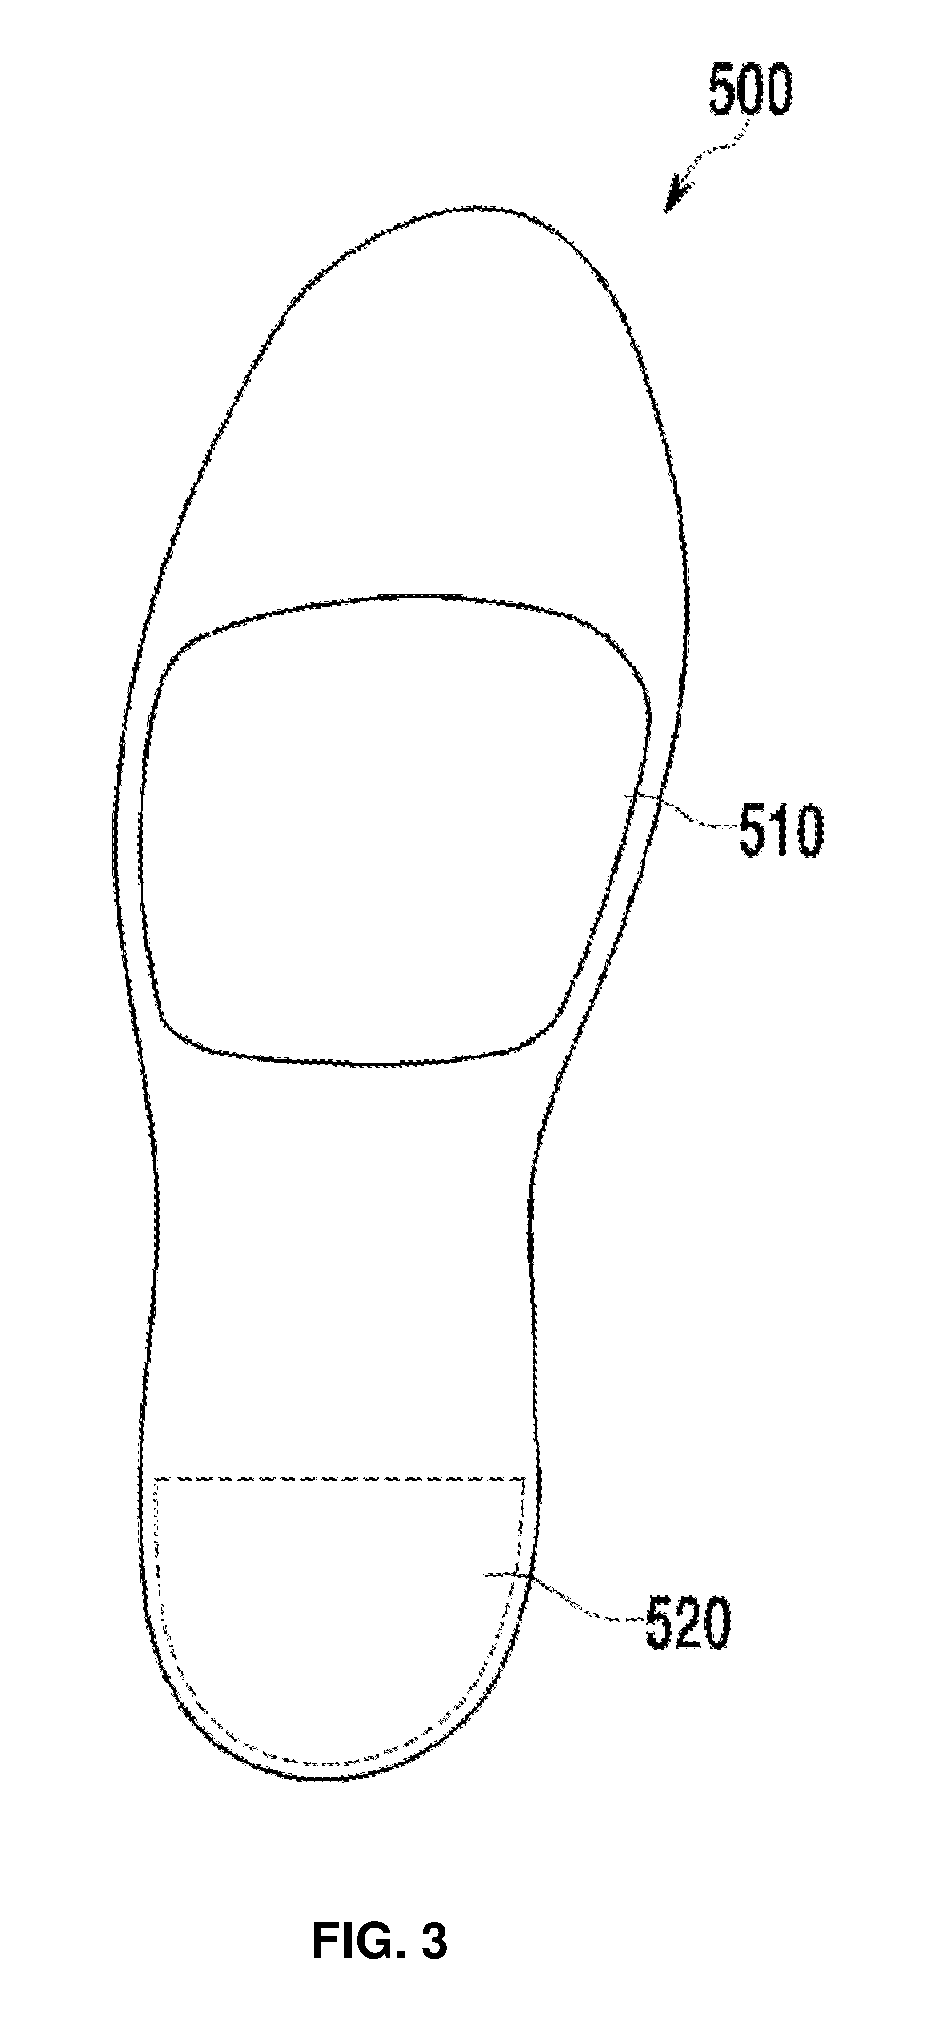 Sole for dispersing pressure of midfoot and metatarsal bones and shoe having same